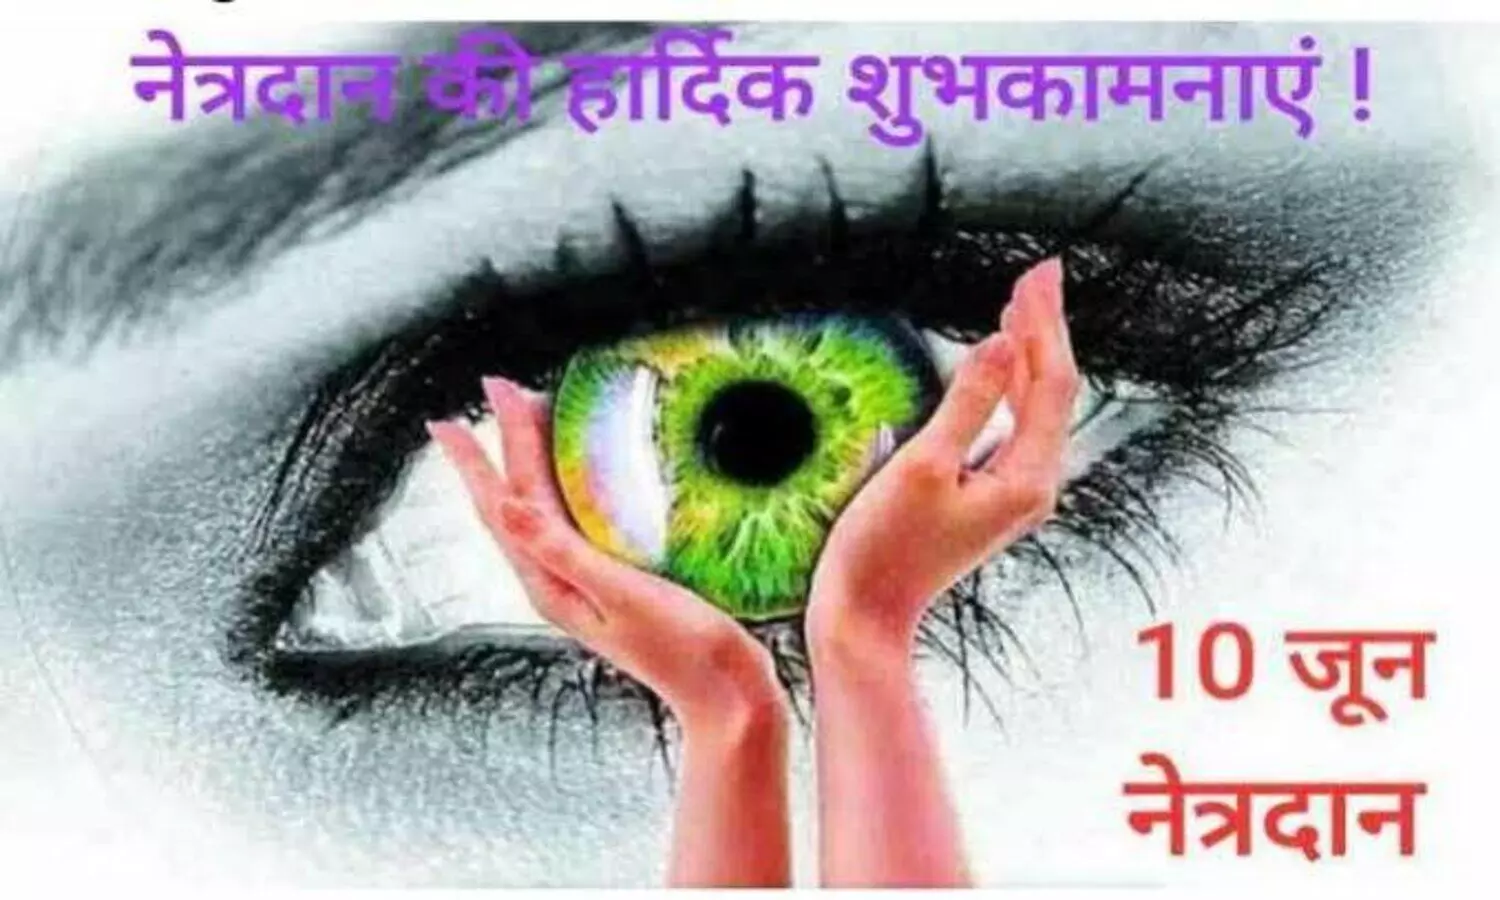 world eye donation day celebrated on 10th june